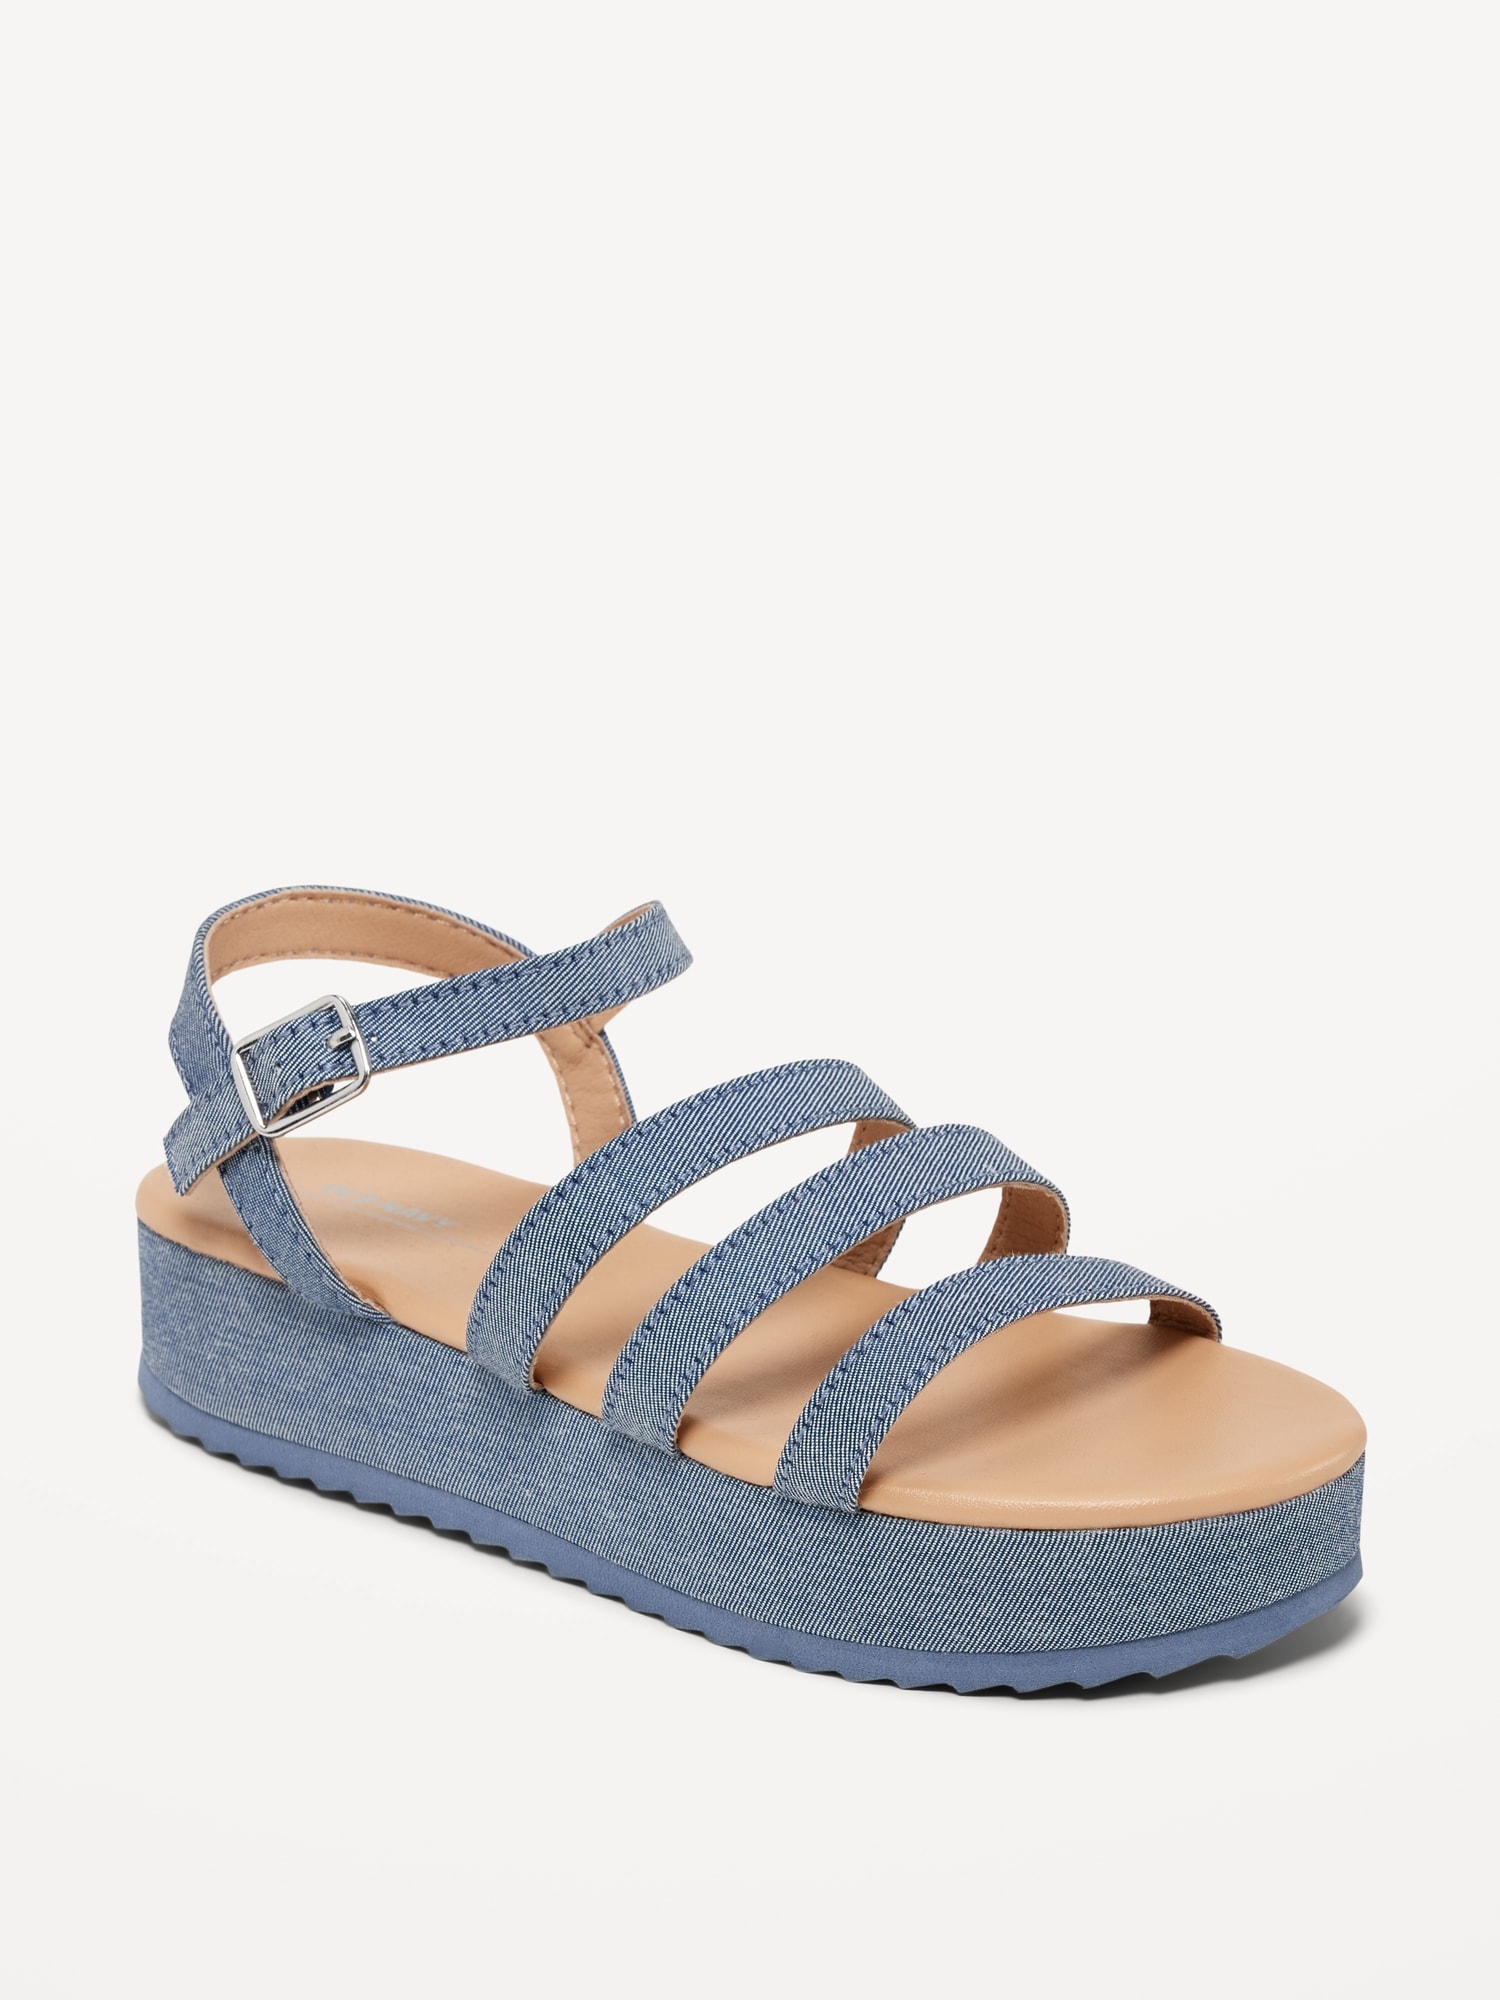 Old Navy Chambray Strappy Platform Sandals for Girls blue. 1